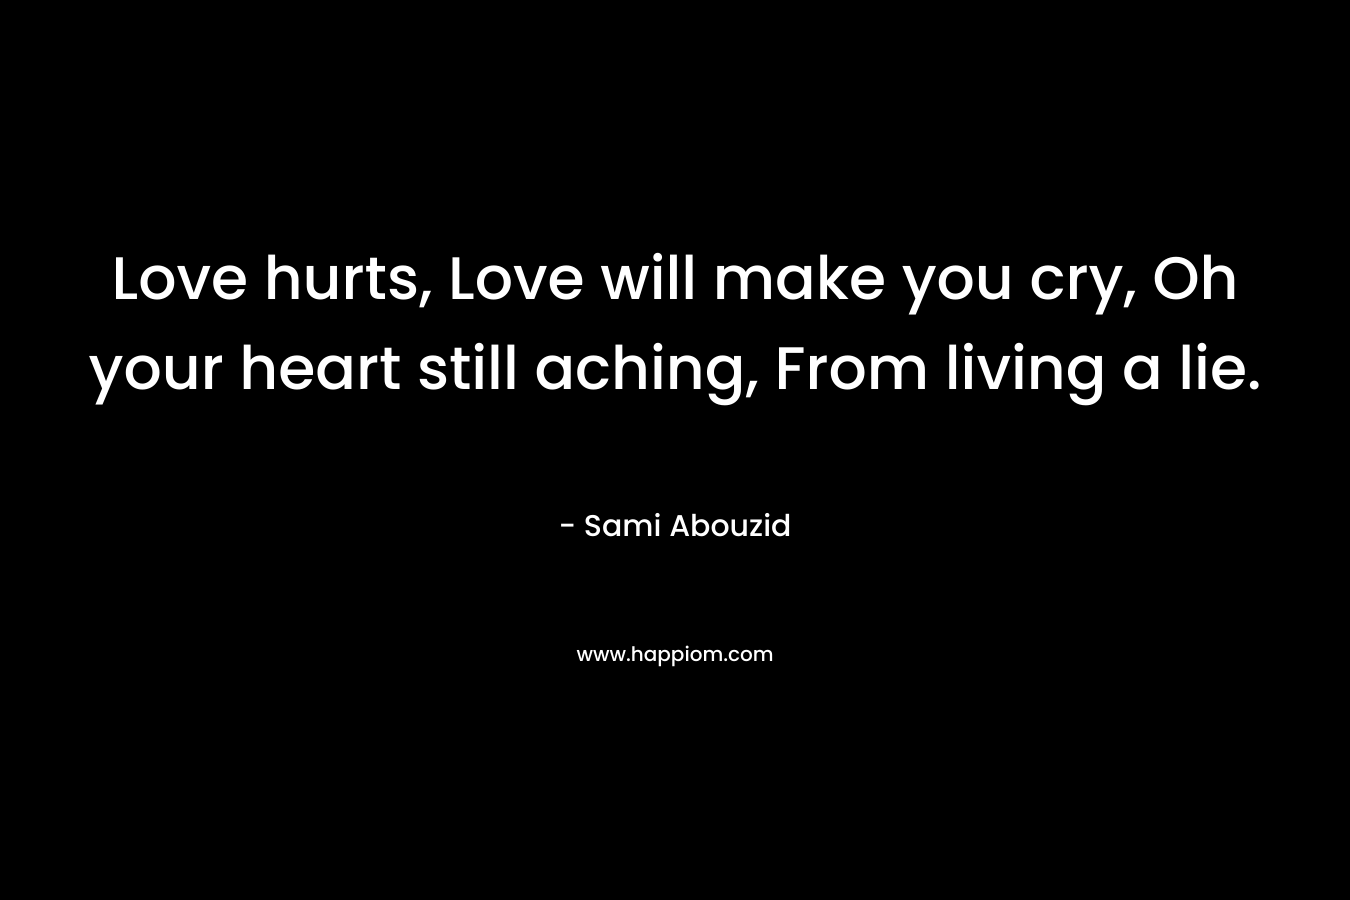 Love hurts, Love will make you cry, Oh your heart still aching, From living a lie. – Sami Abouzid